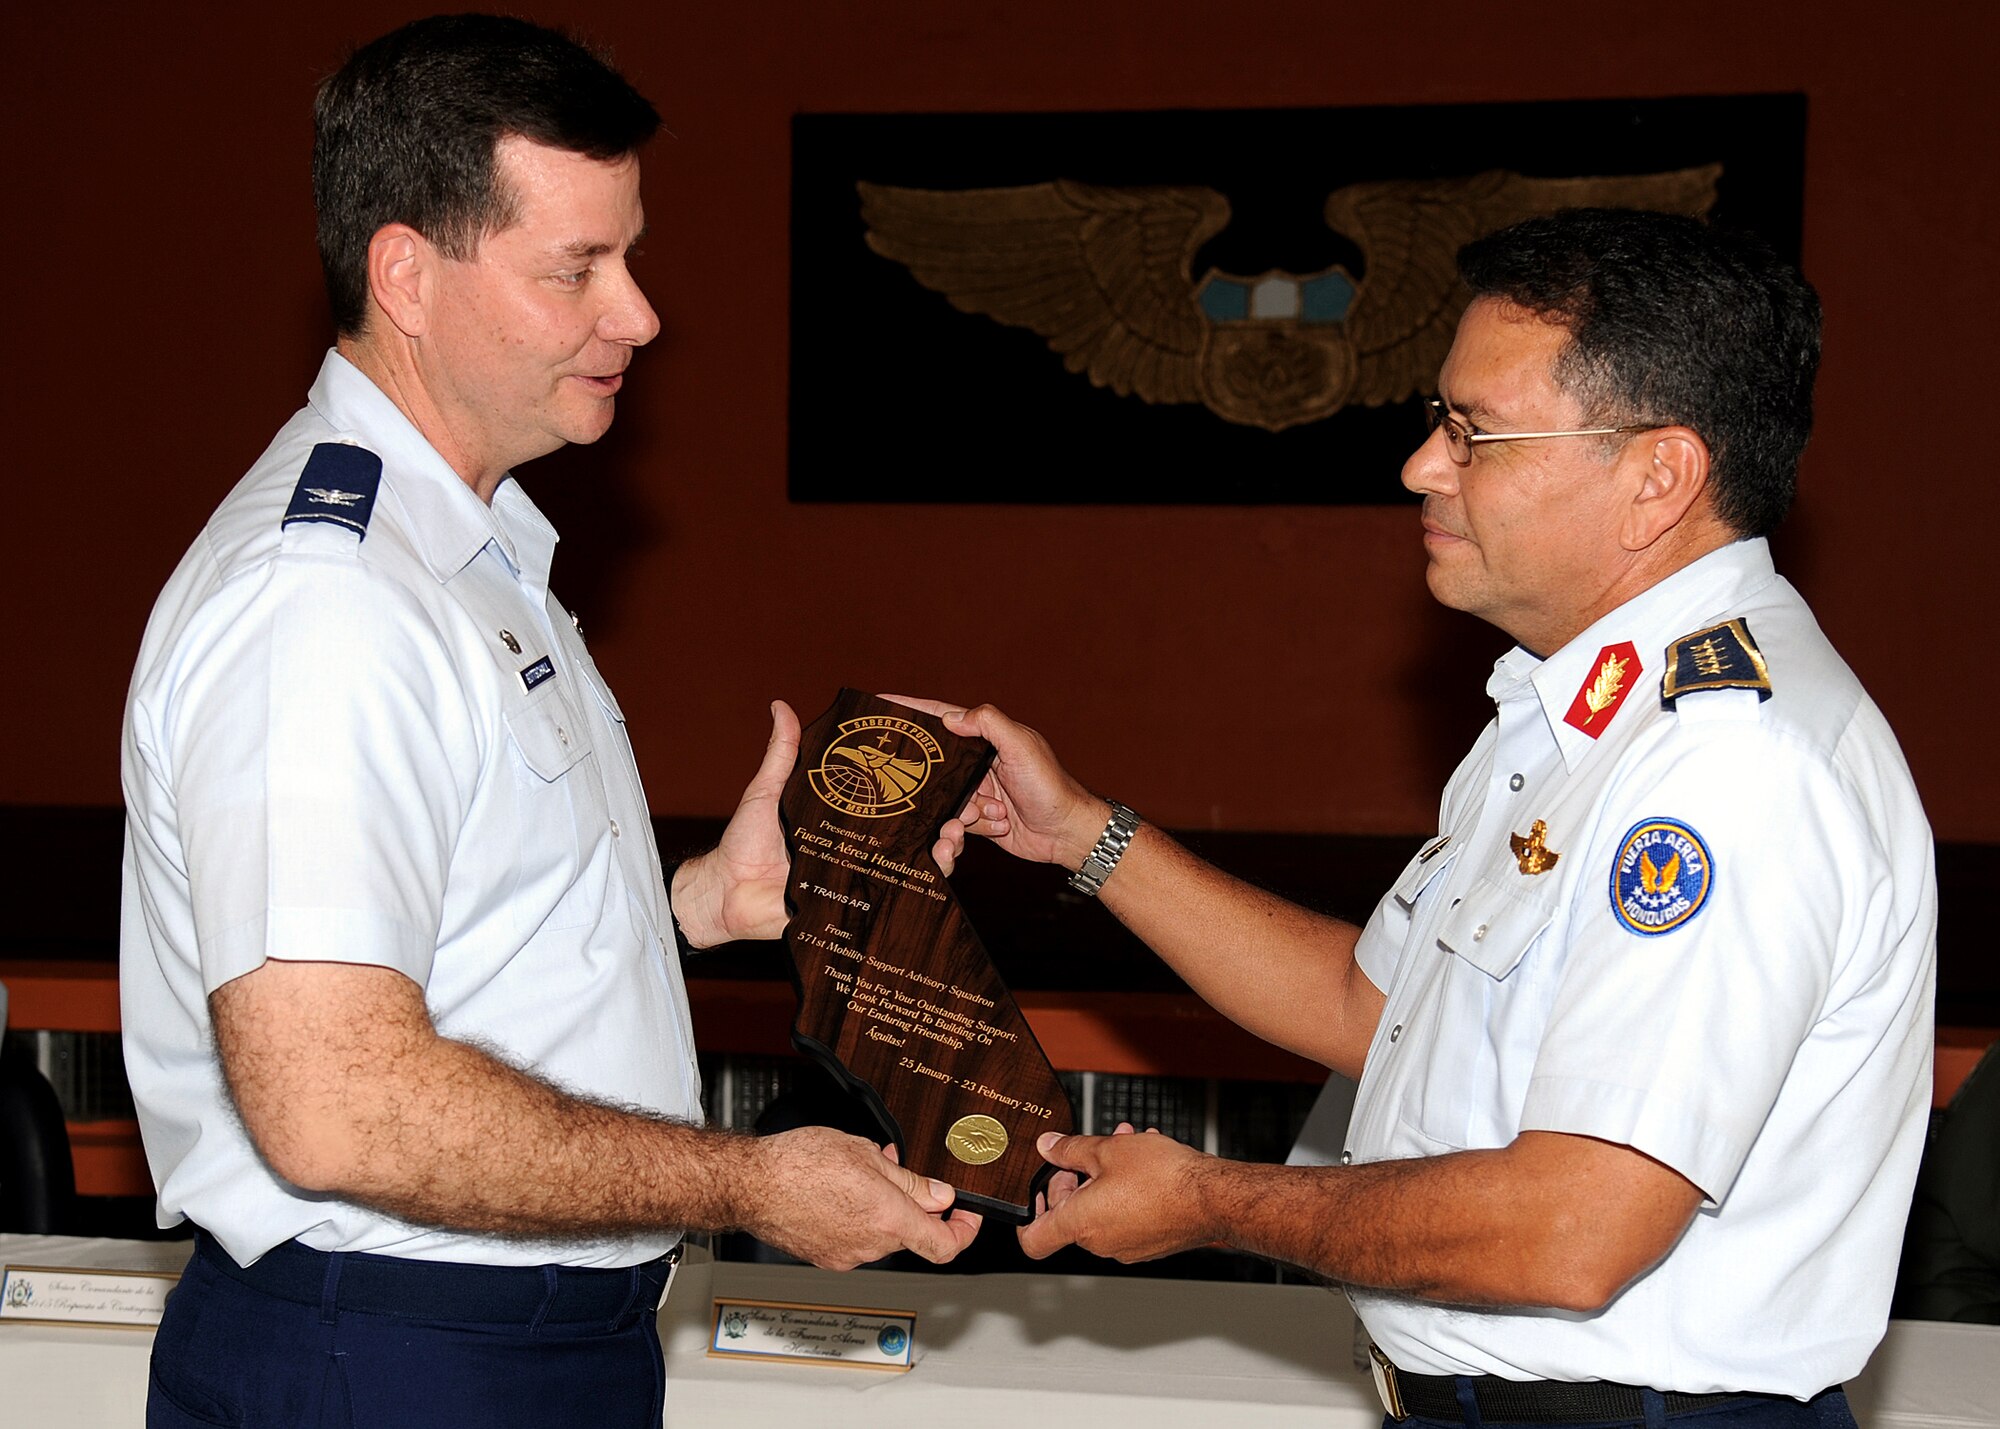 Colonel Gary Gottschall, 615th Contingency Response Wing commander, presents Brig. Gen. Ruiz Pastor Landa Dubón, Honduran air force commanding general, a plaque and thanks him for his hospitality and partnership between the two air forces following the opening ceremony in Tegucigalpa, Honduras, Feb. 23.  (U.S. Air Force photo by Tech. Sgt. Lesley Waters)